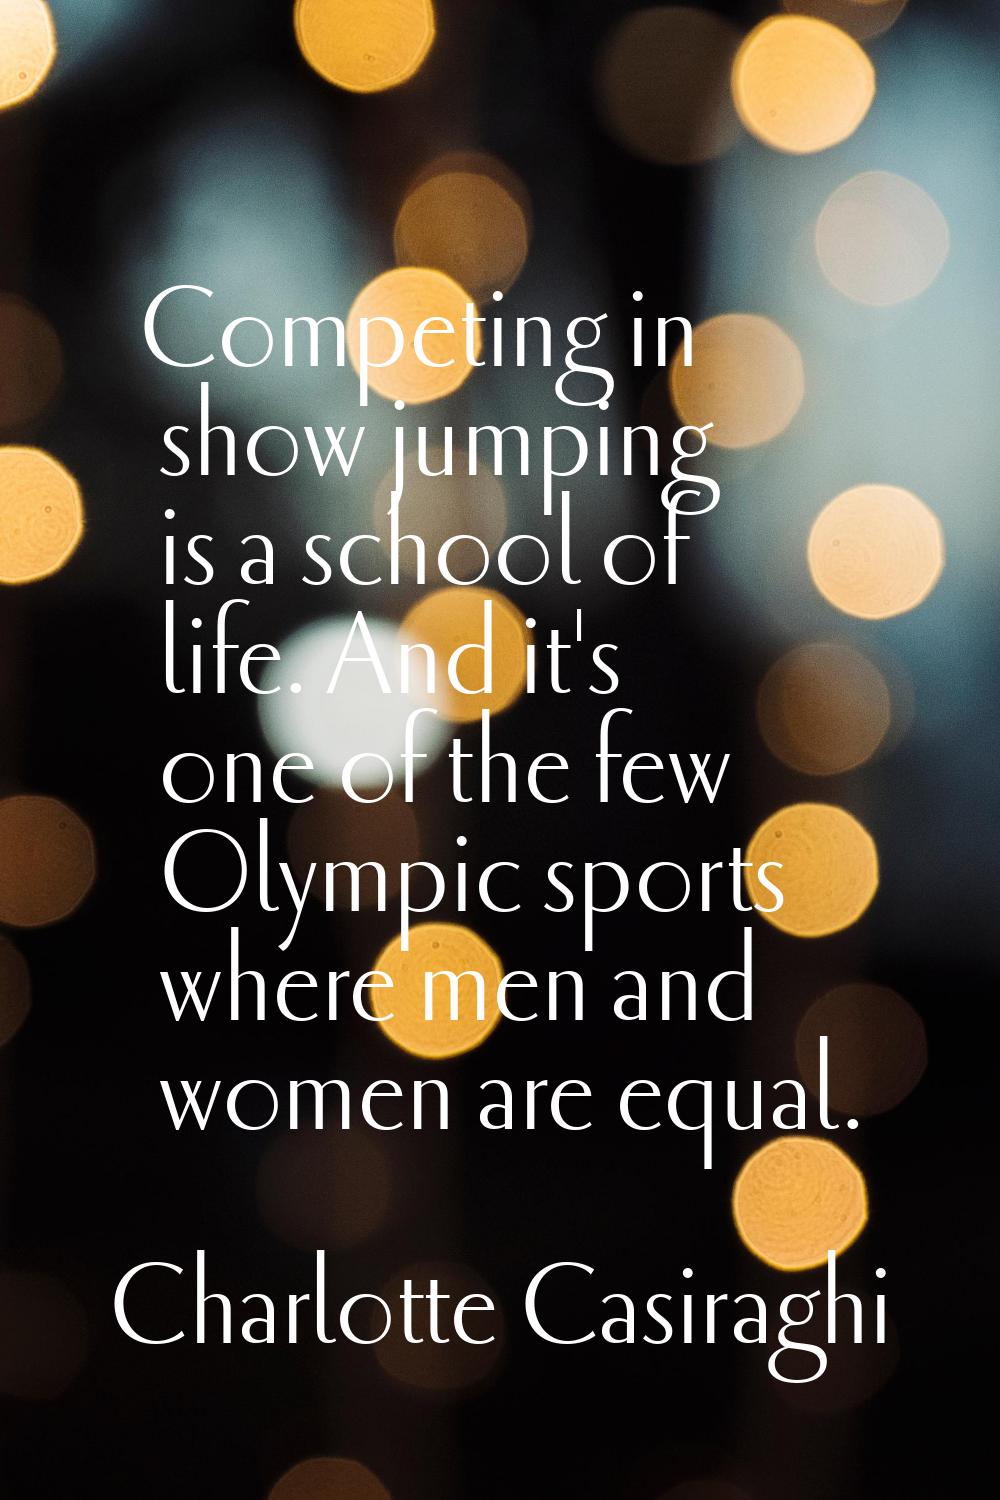 Competing in show jumping is a school of life. And it's one of the few Olympic sports where men and